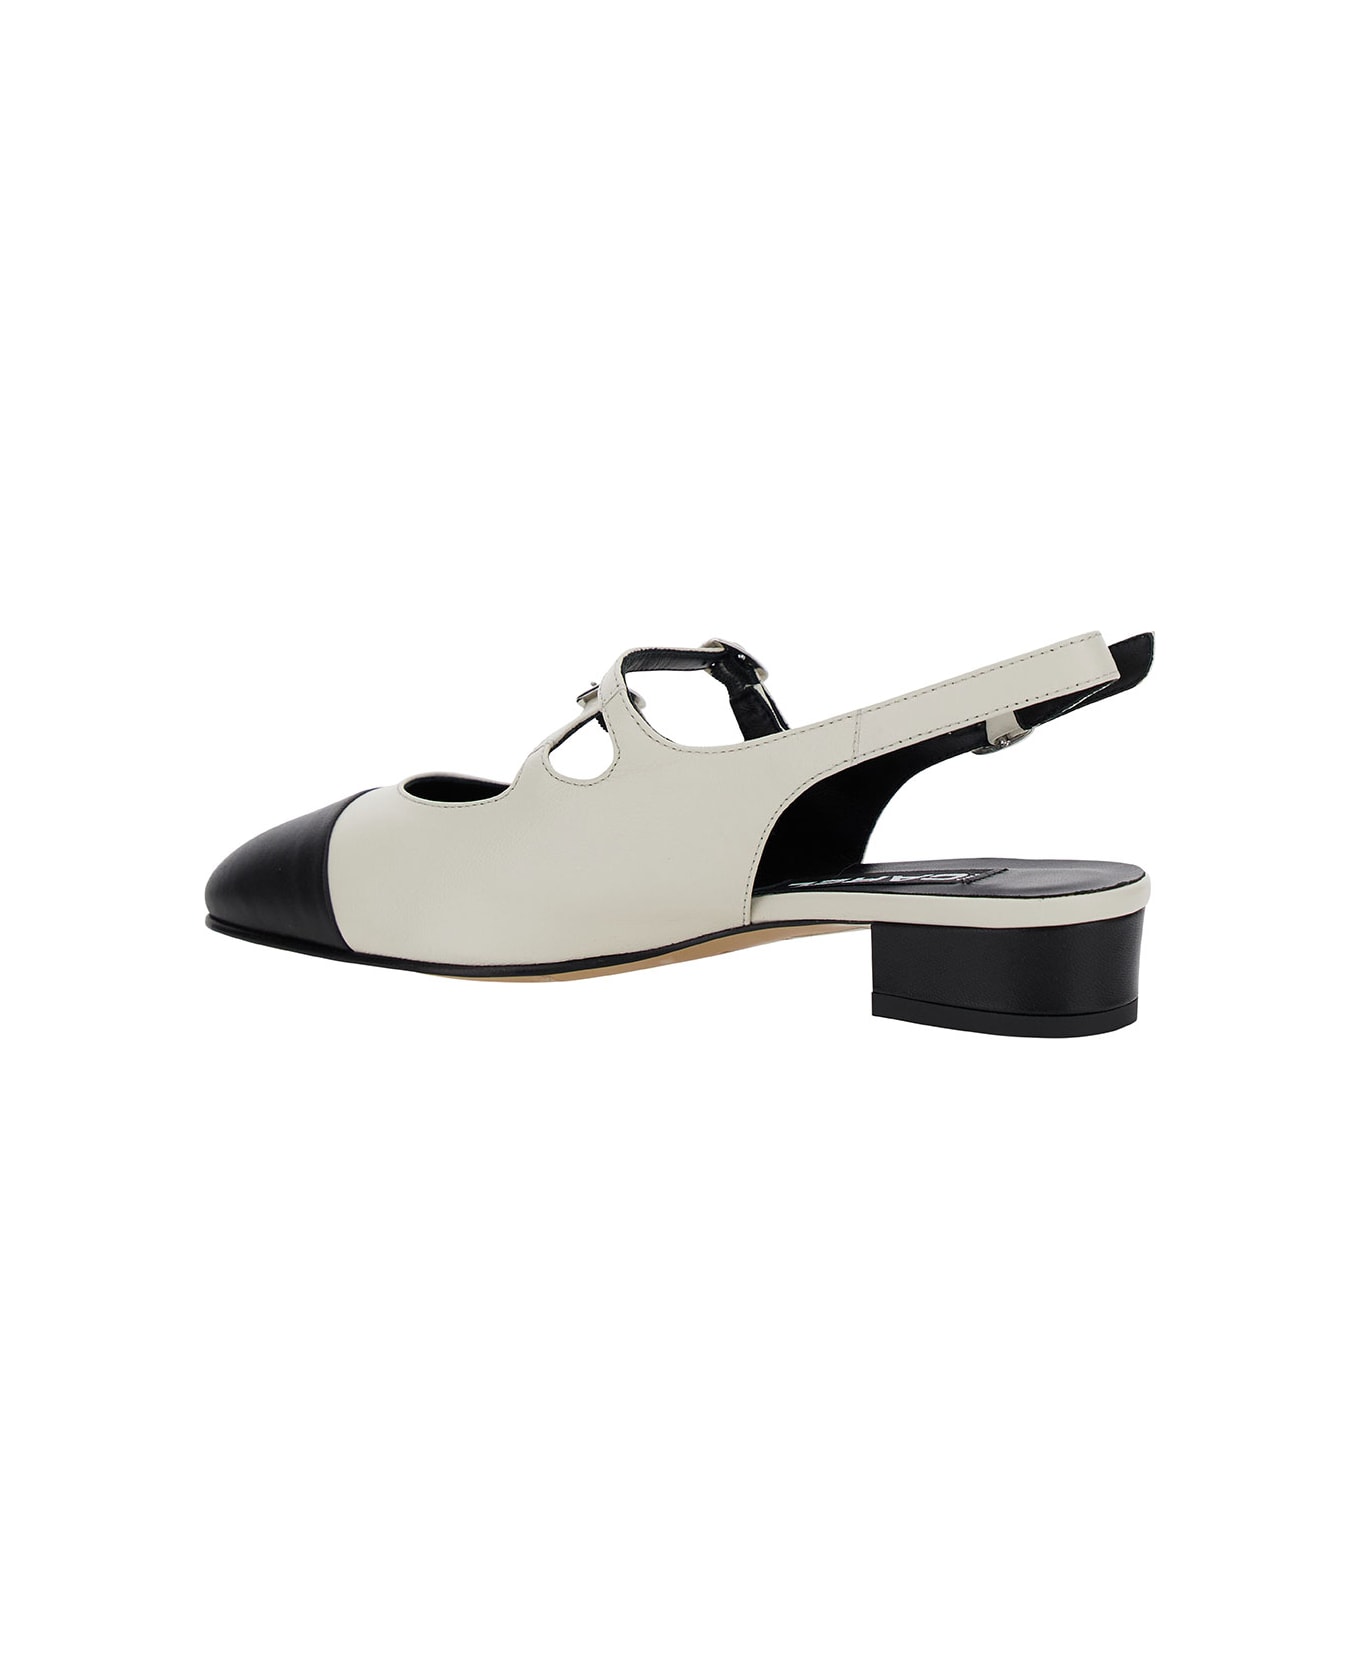 Carel 'abricot' White Slingback Mary Janes With Contrasting Toe In Leather Woman - Beige ハイヒール